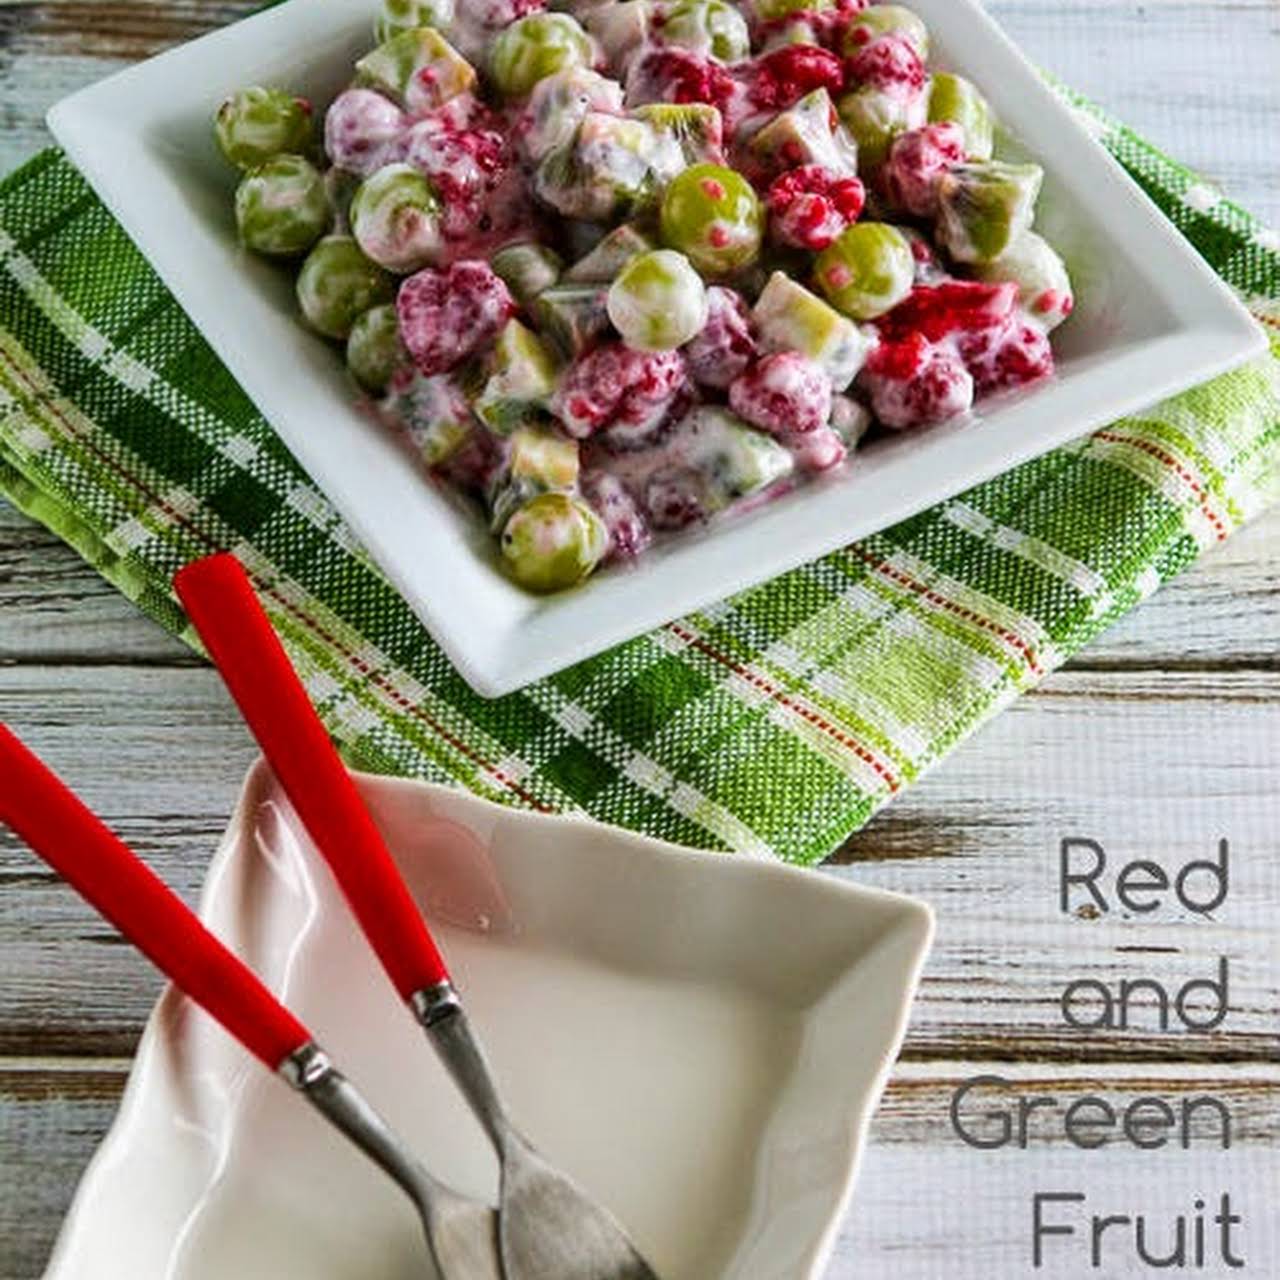 Red and Green Fruit Salad